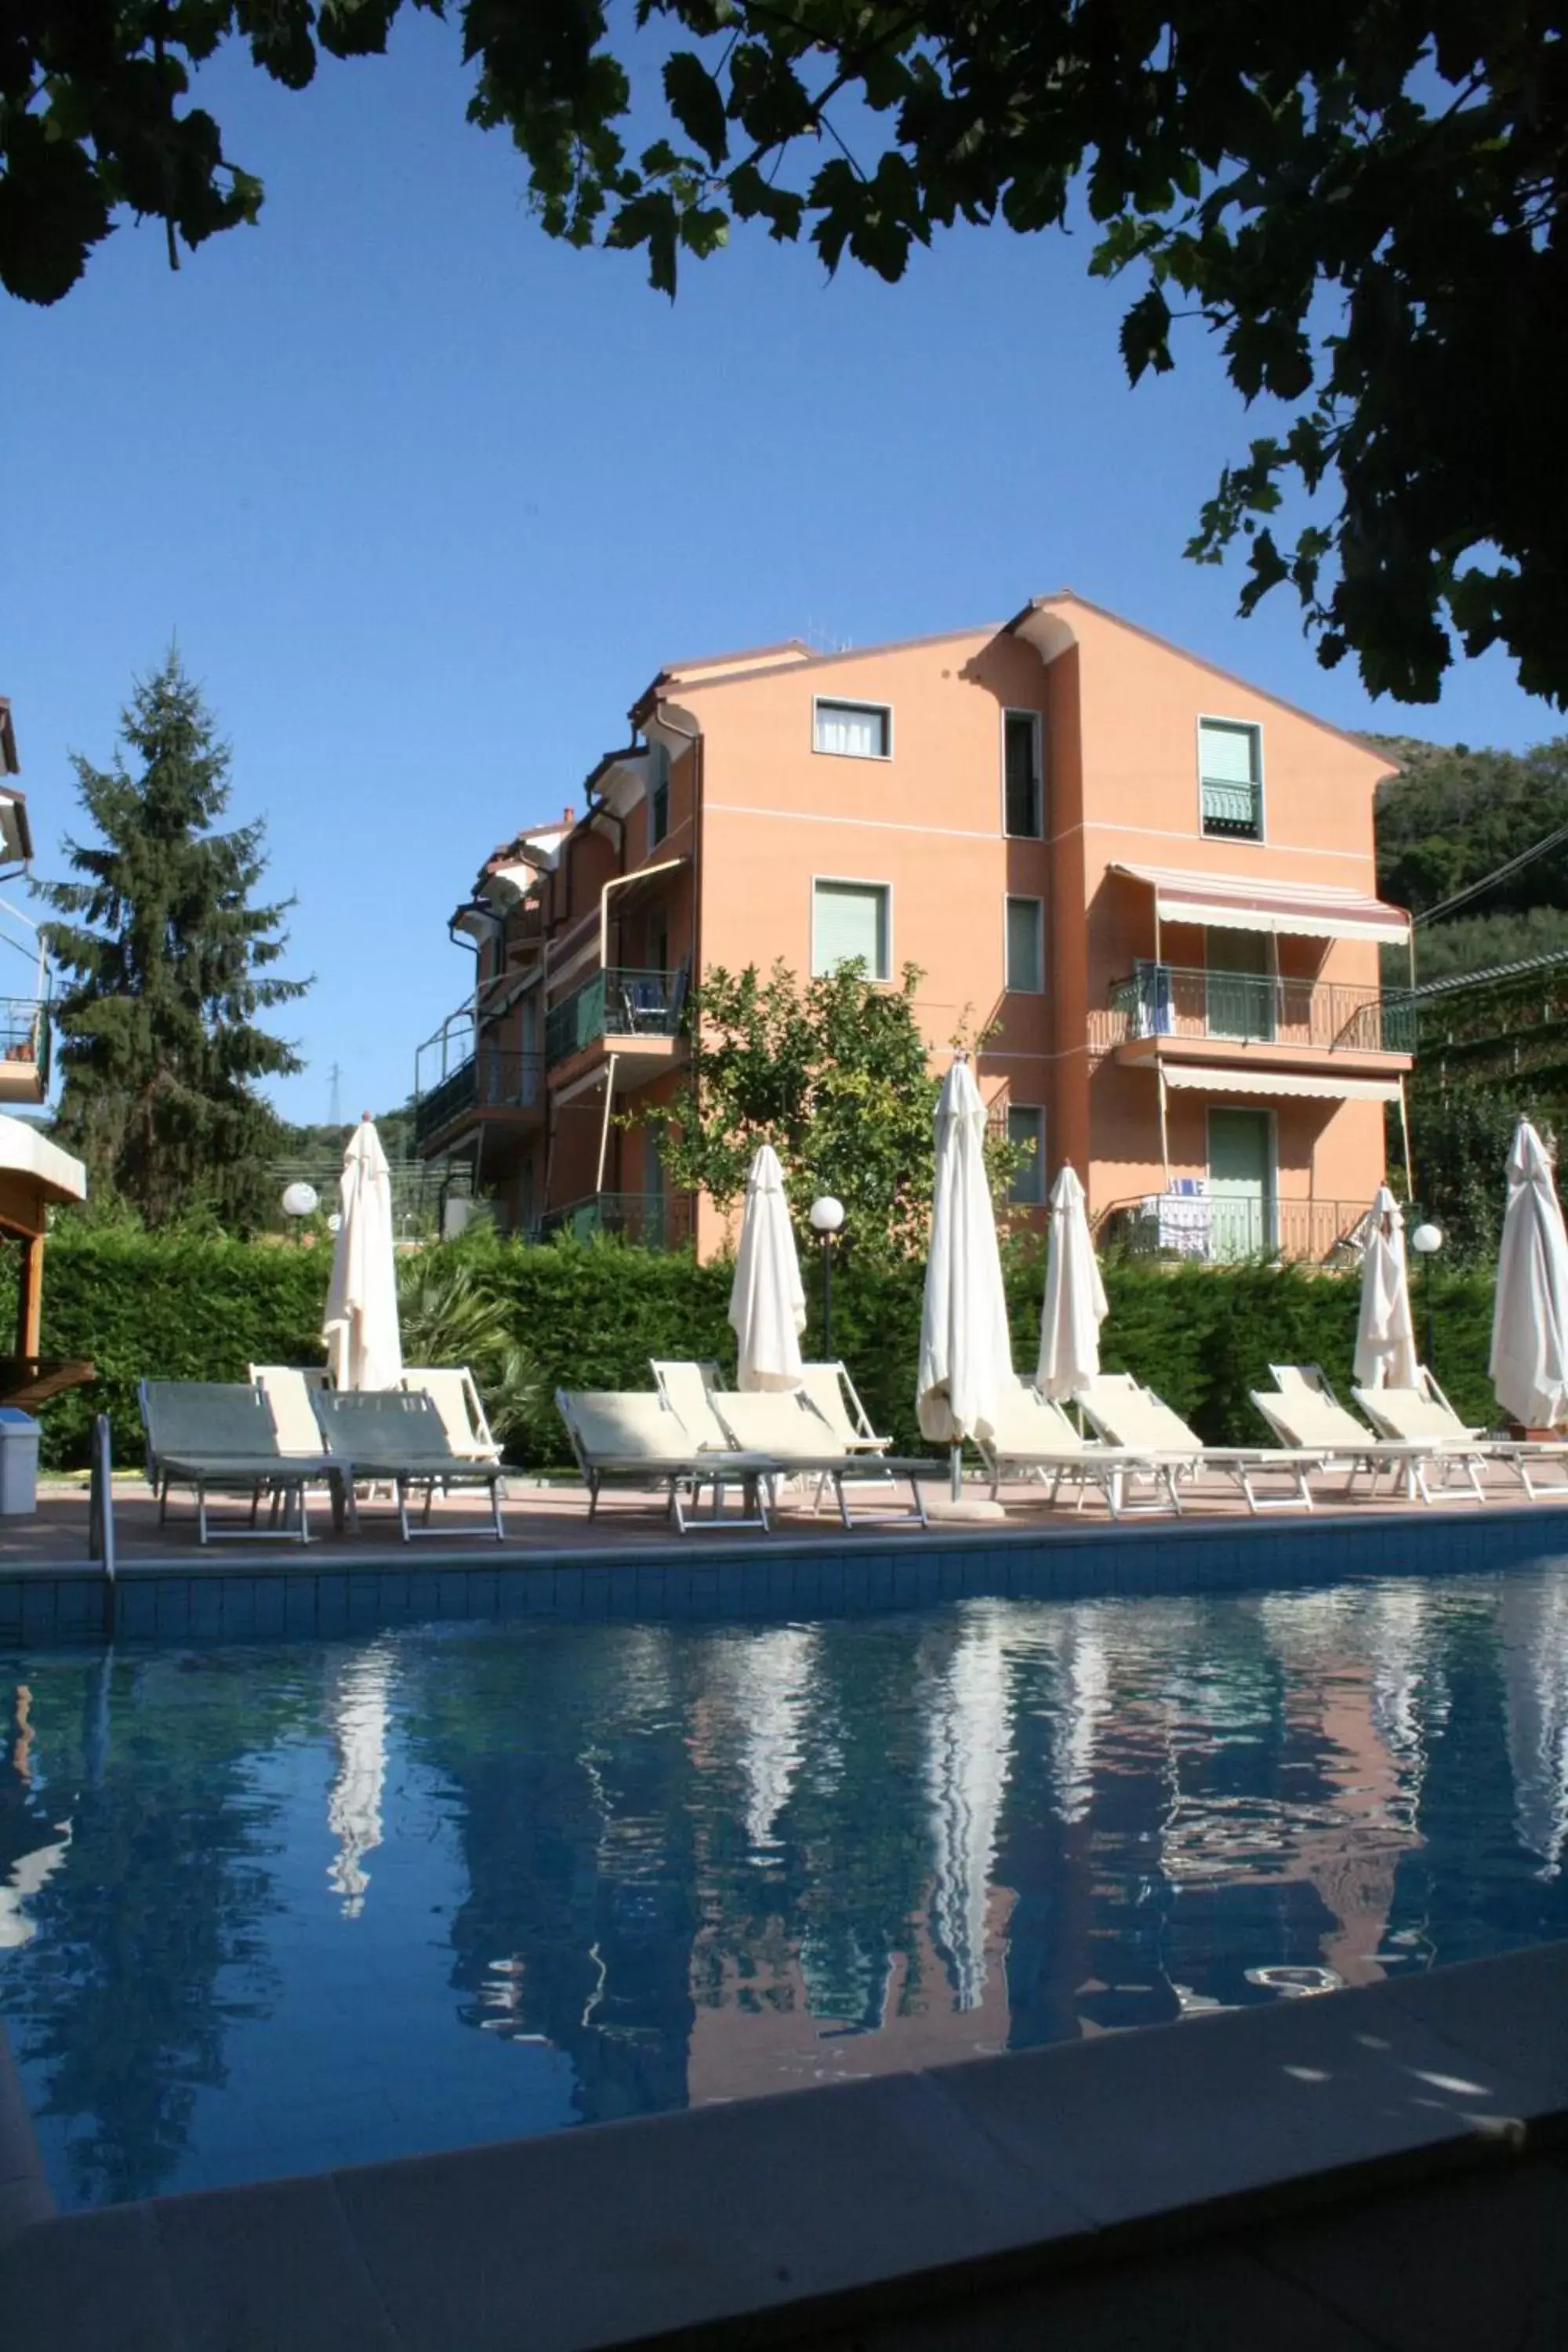 Property building, Swimming Pool in Residence Holidays